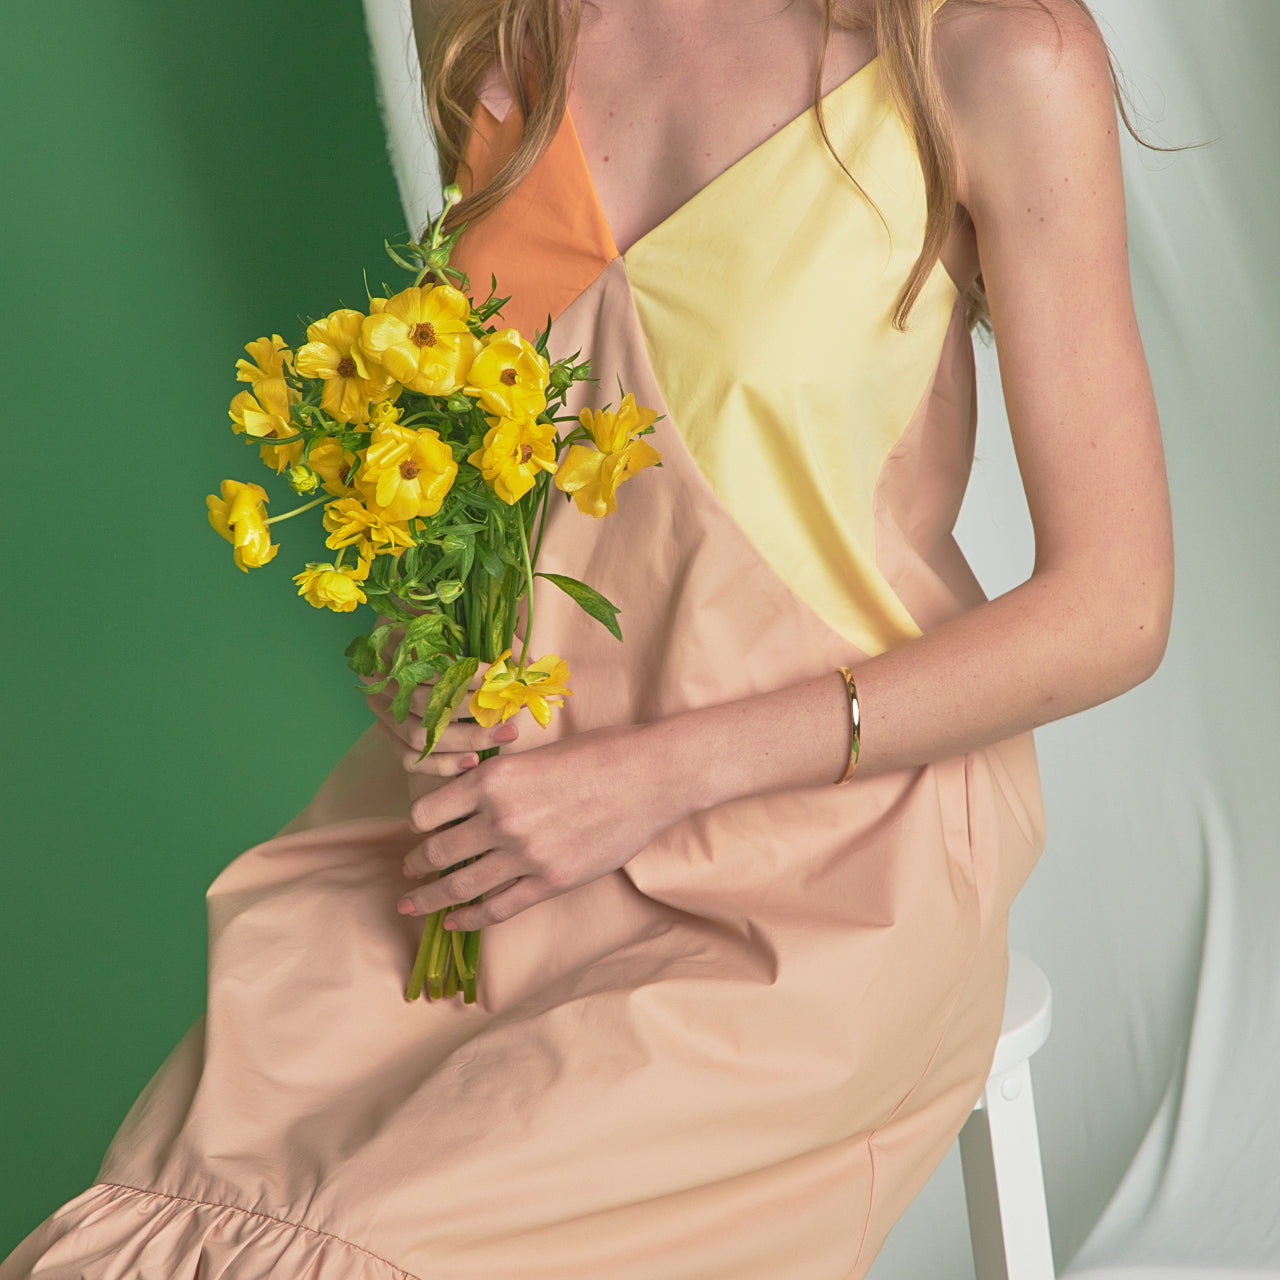 Discover Our Latest English Factory Editorial, "Welcome To The Garden Party"